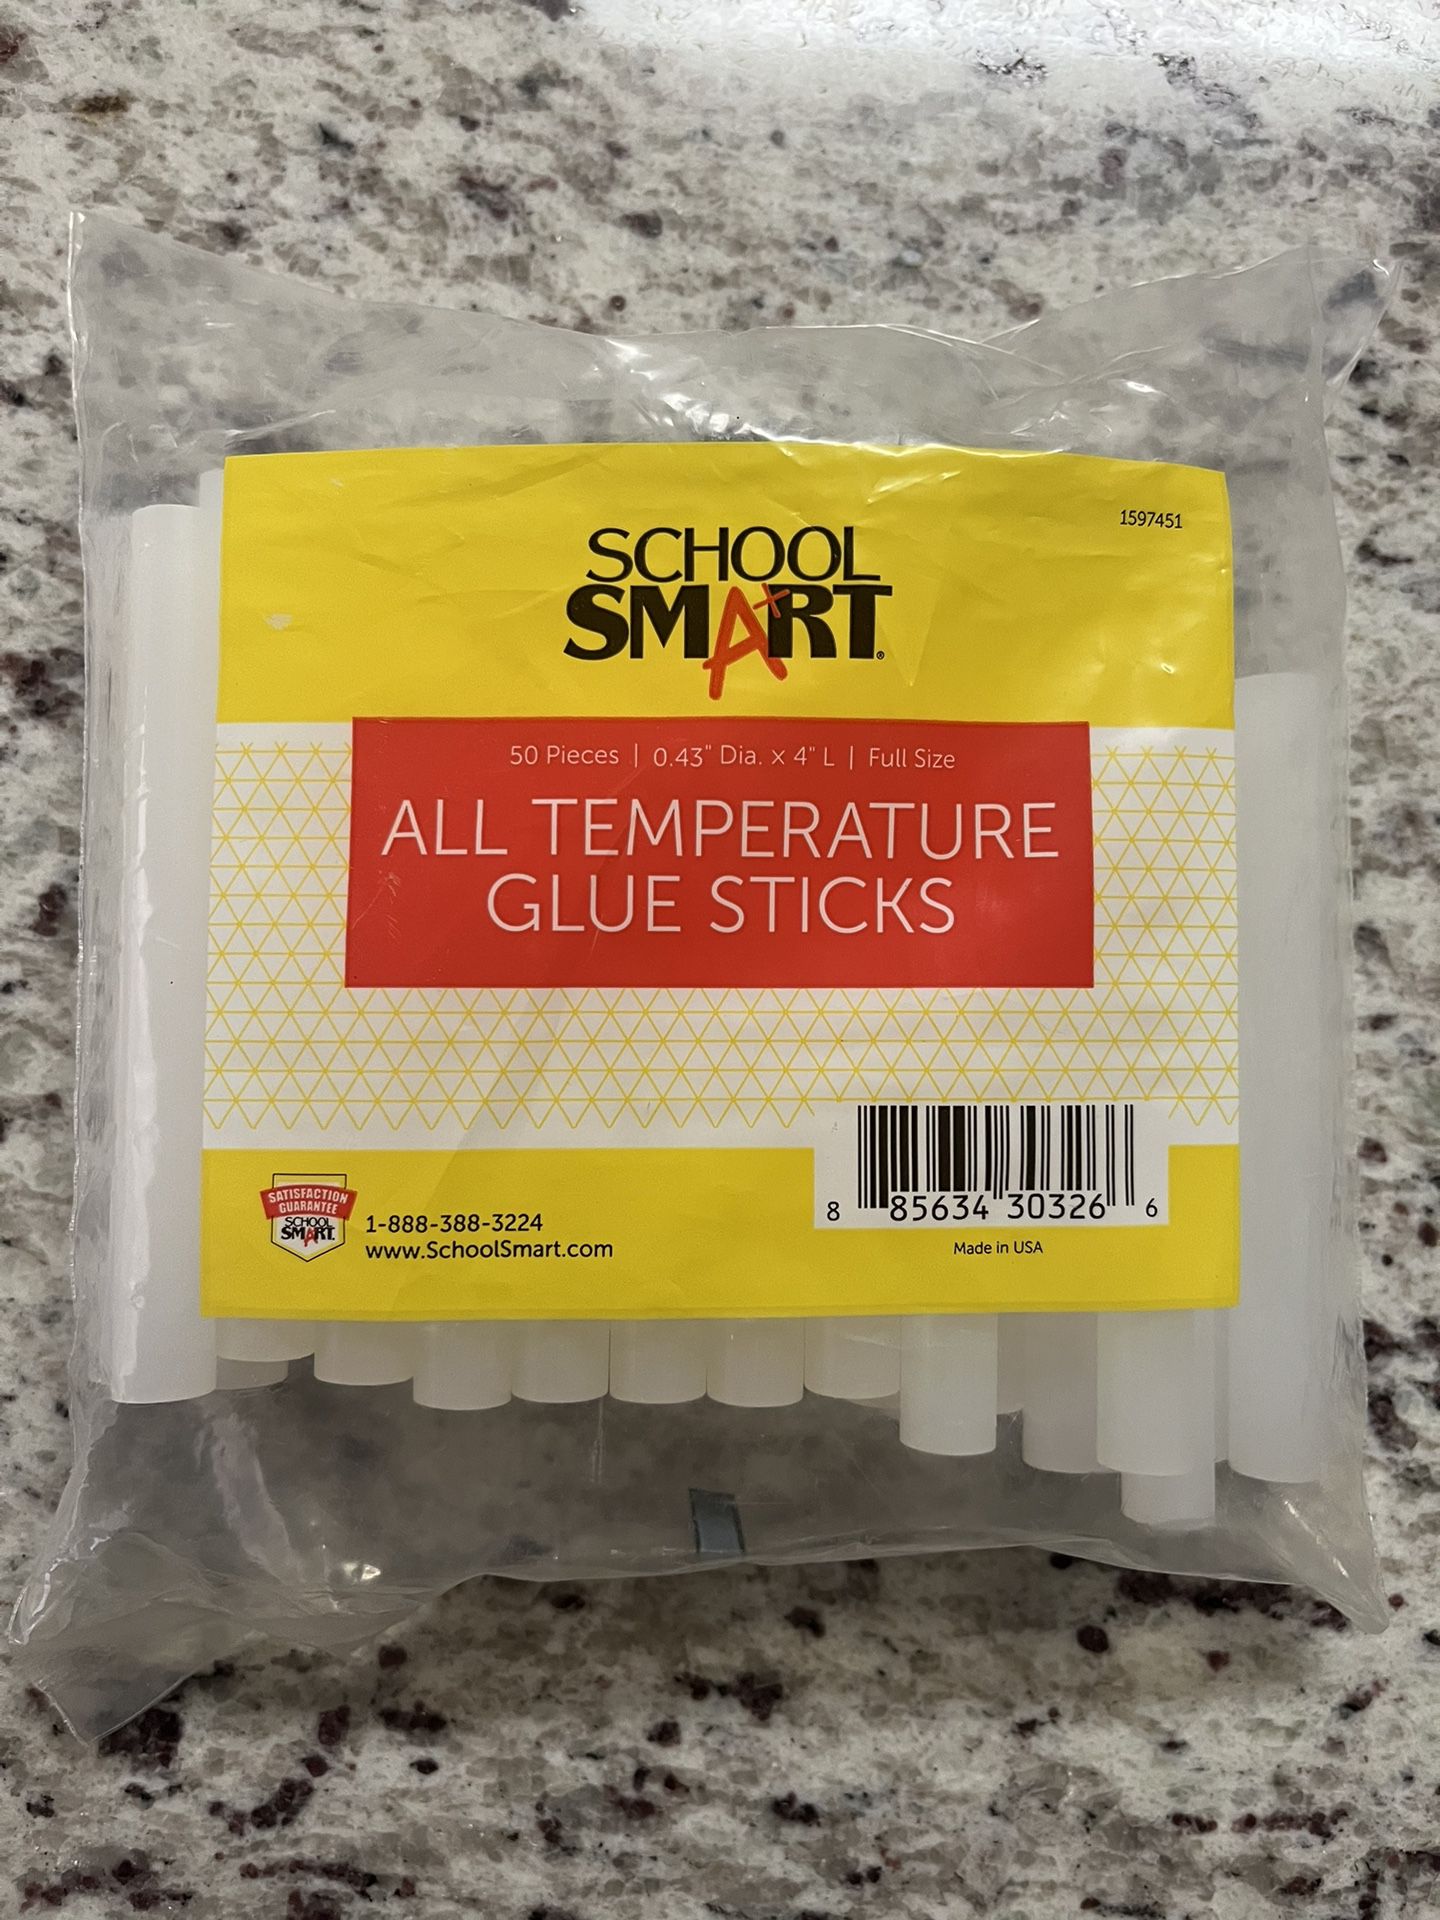 Never Opened Hot Glue Sticks - 3 Packages